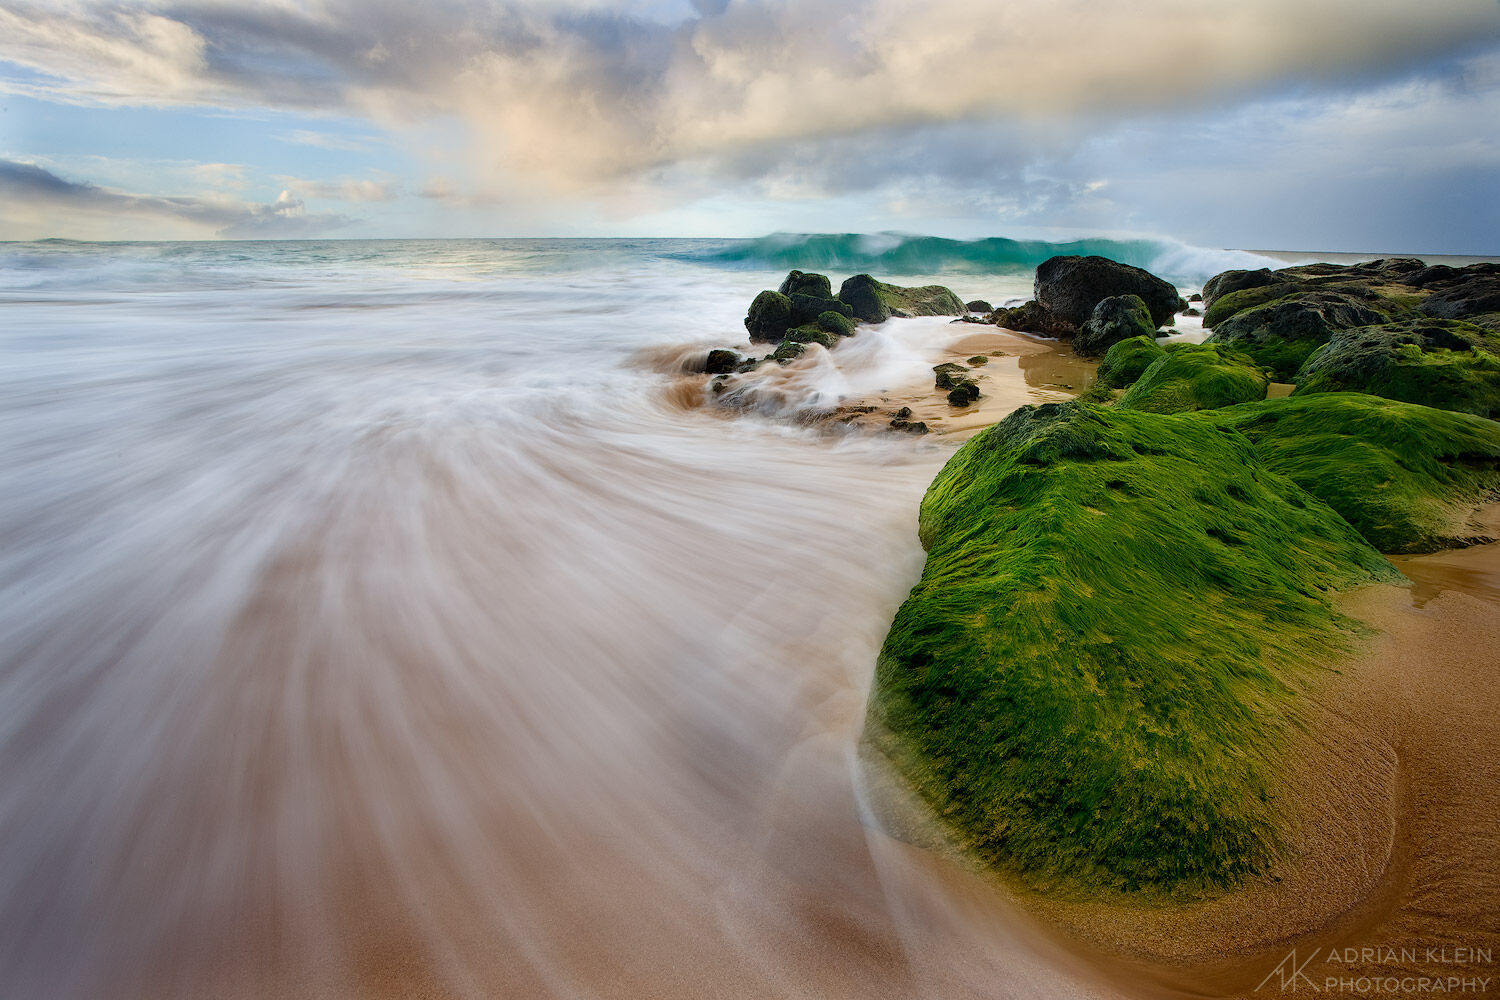 Waves coming right at me into the camera at sunset along the southeast shore of Kauai, Hawaii. Limited Edition of 50.